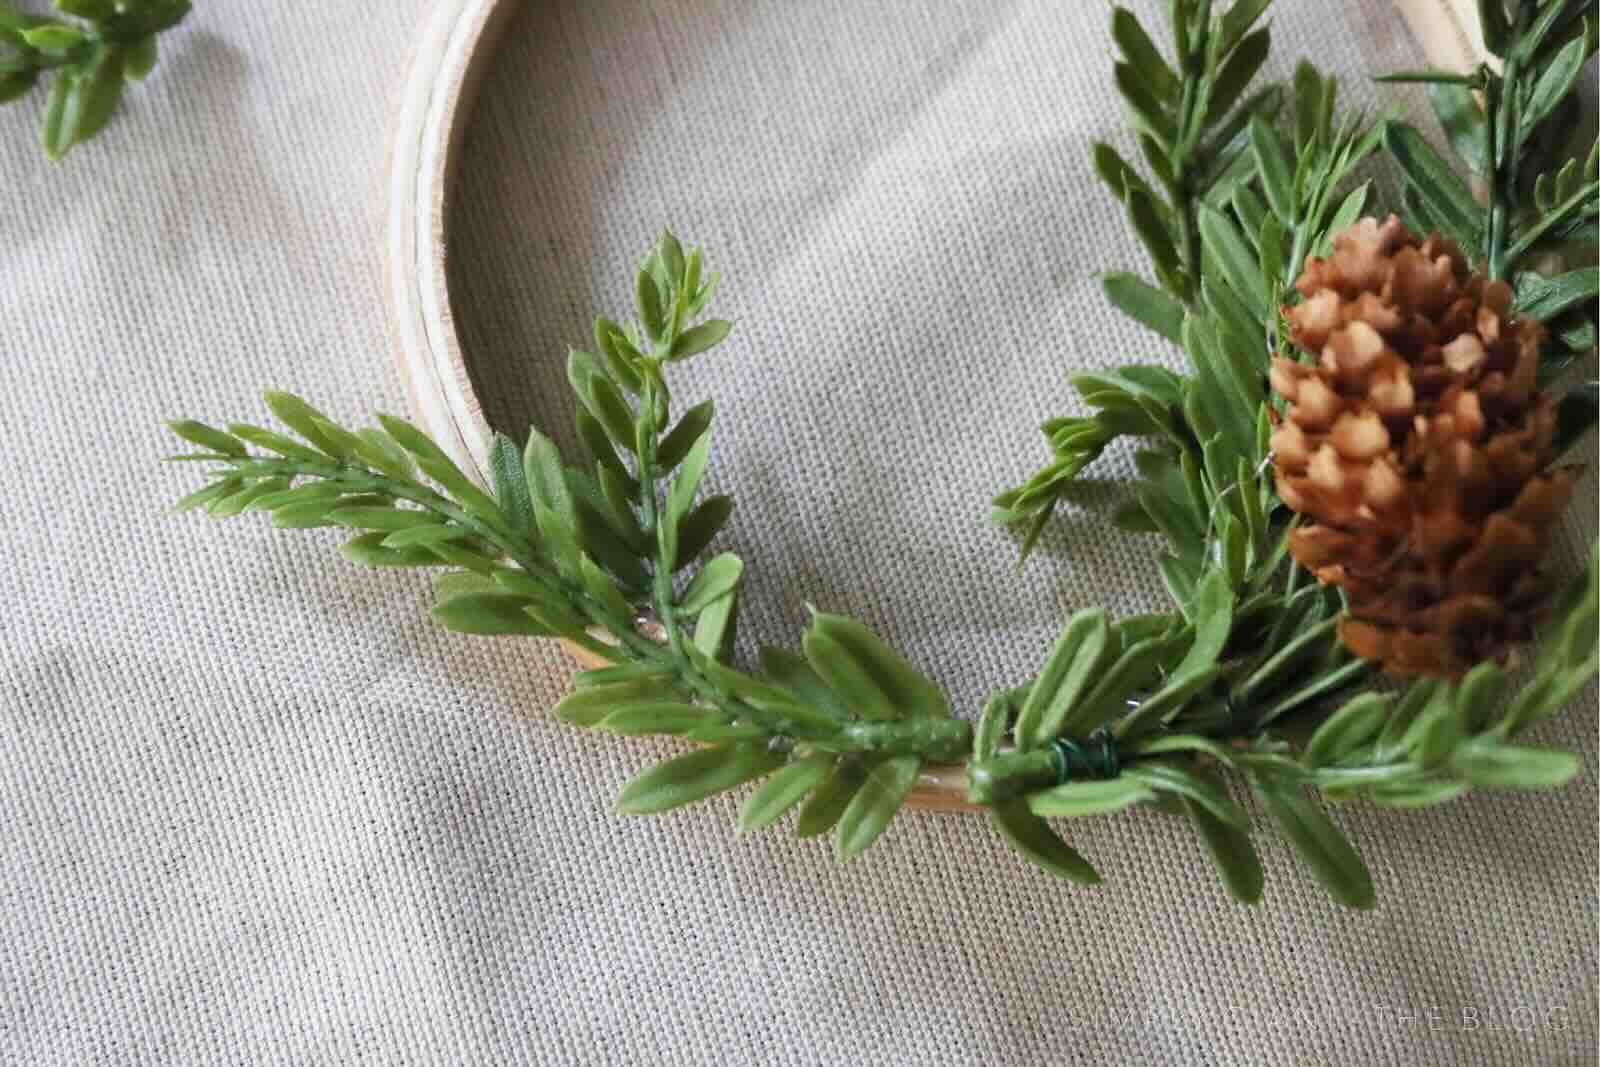 How To Attach Greenery Picks To An Embroidery Hoop Design